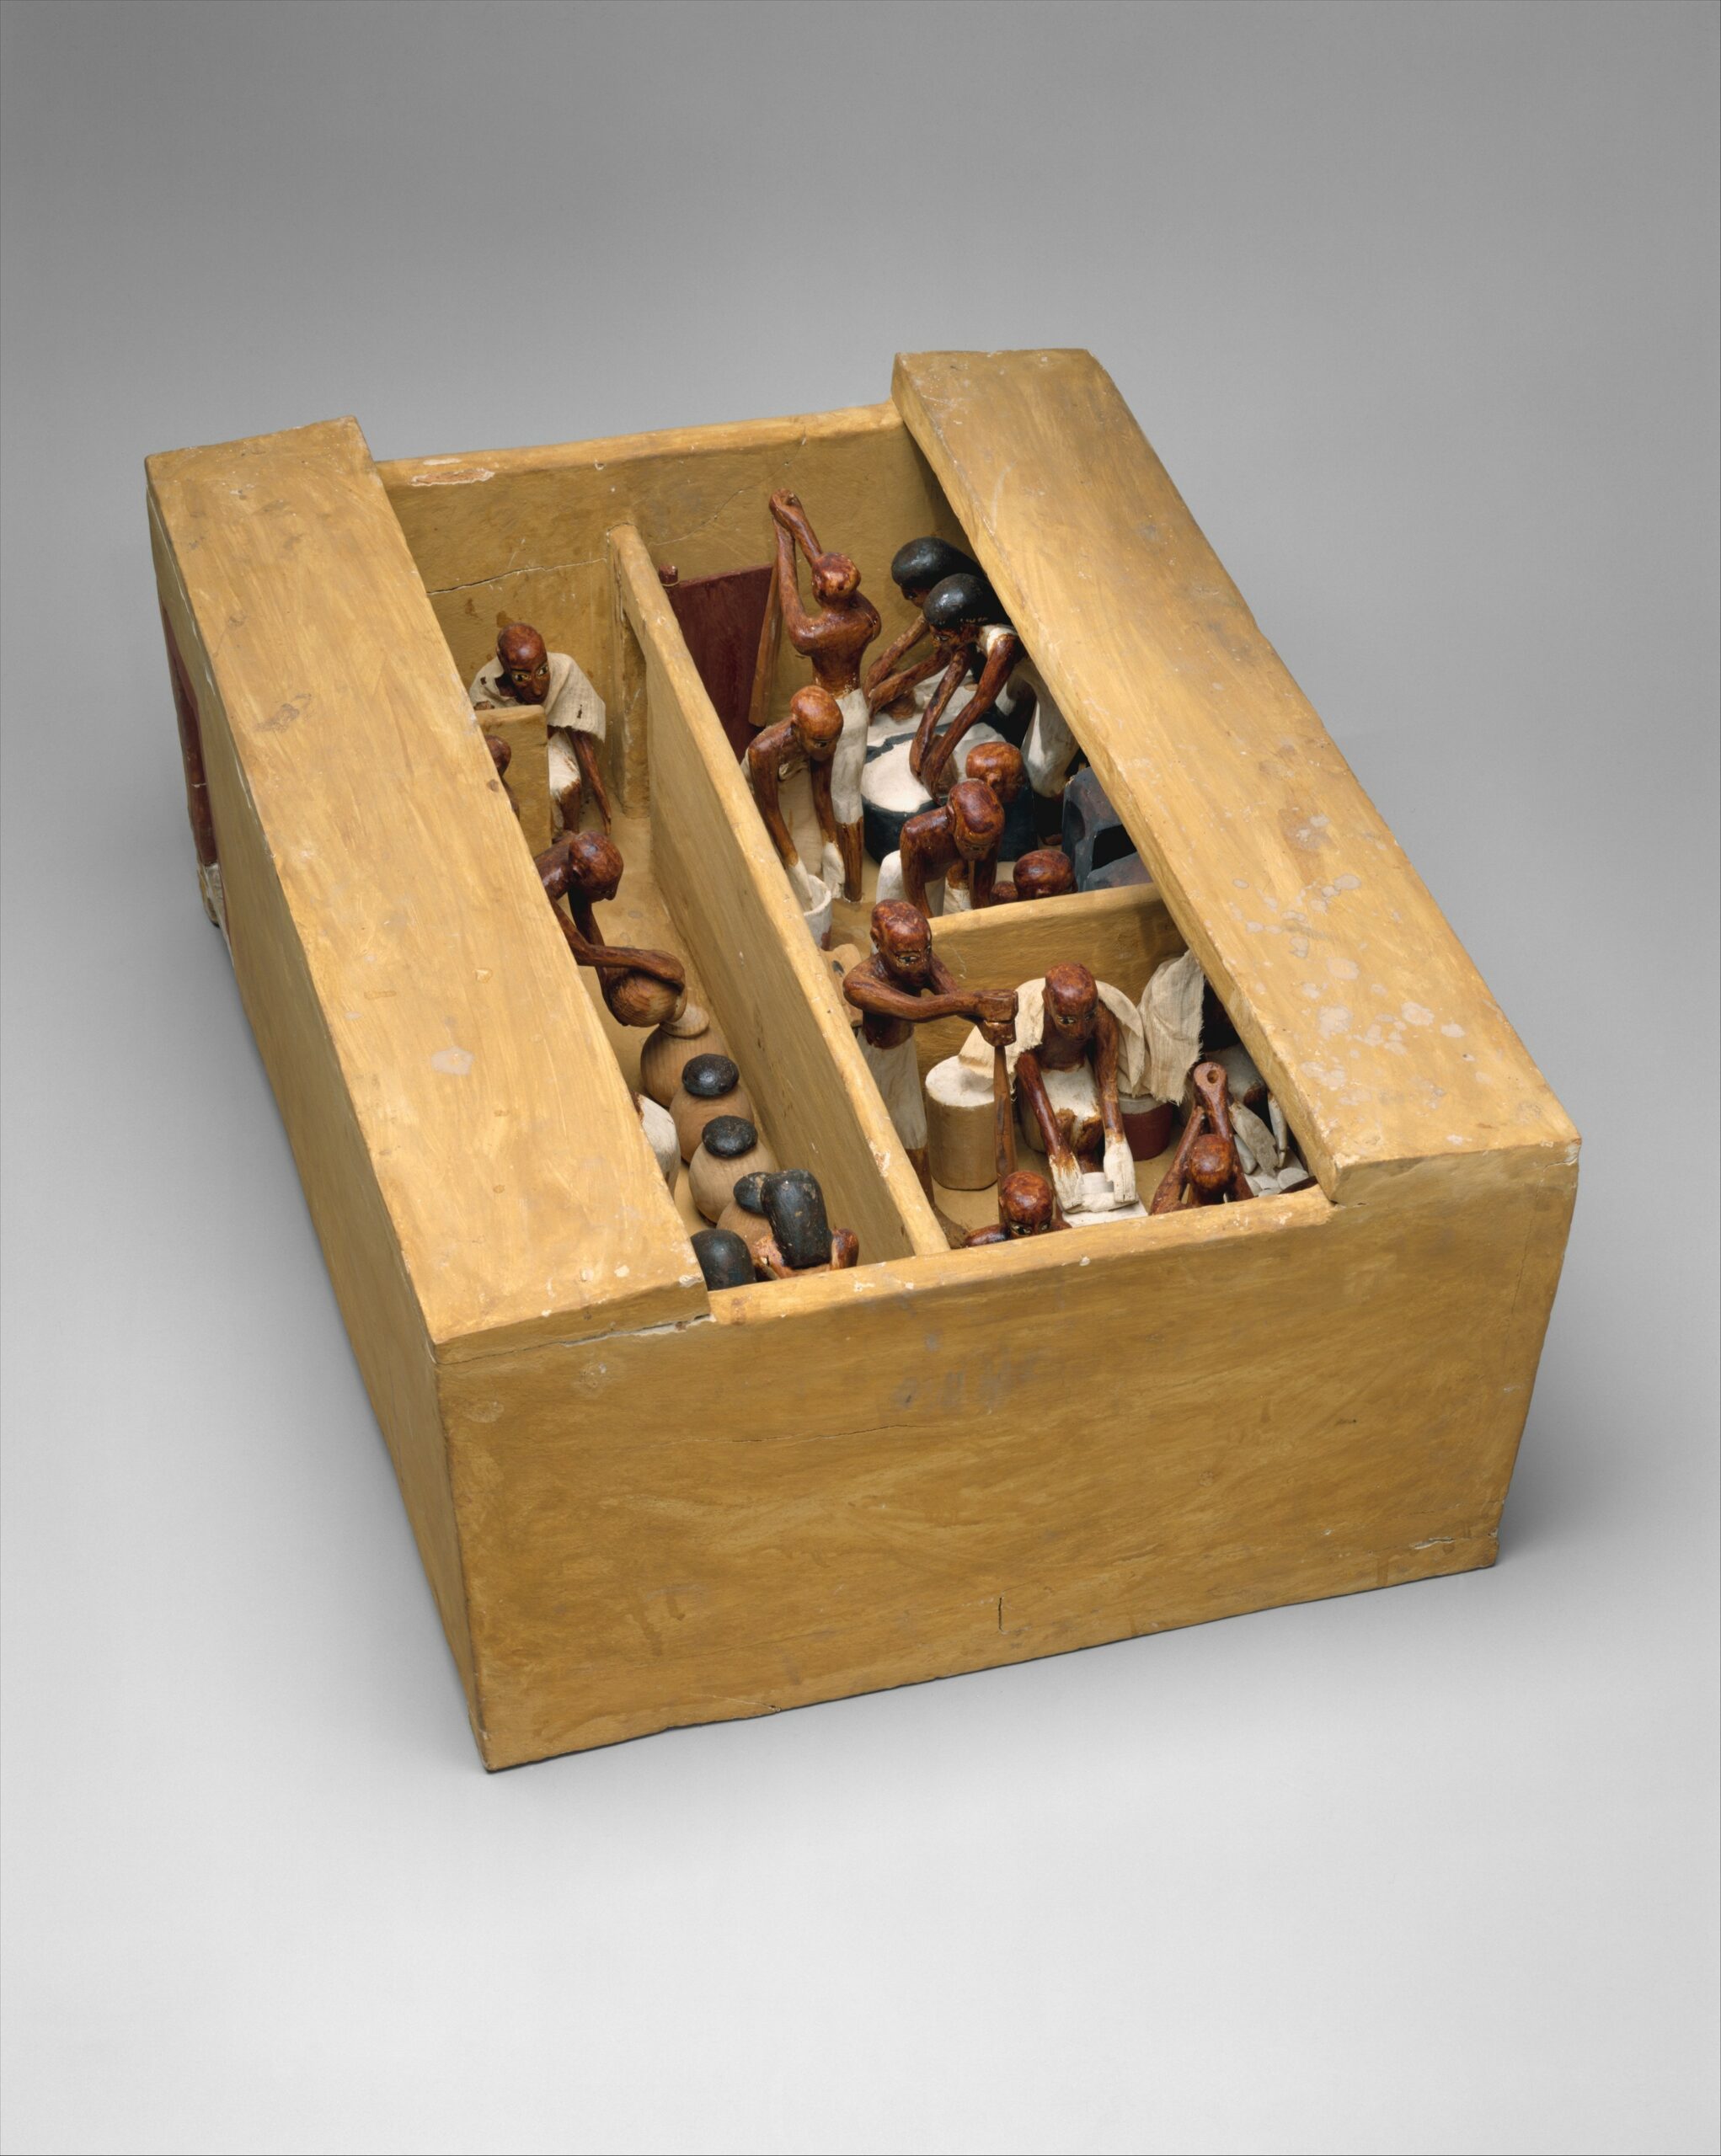 A miniature box divided into three portions each with scale models of small bakers working to bake food.